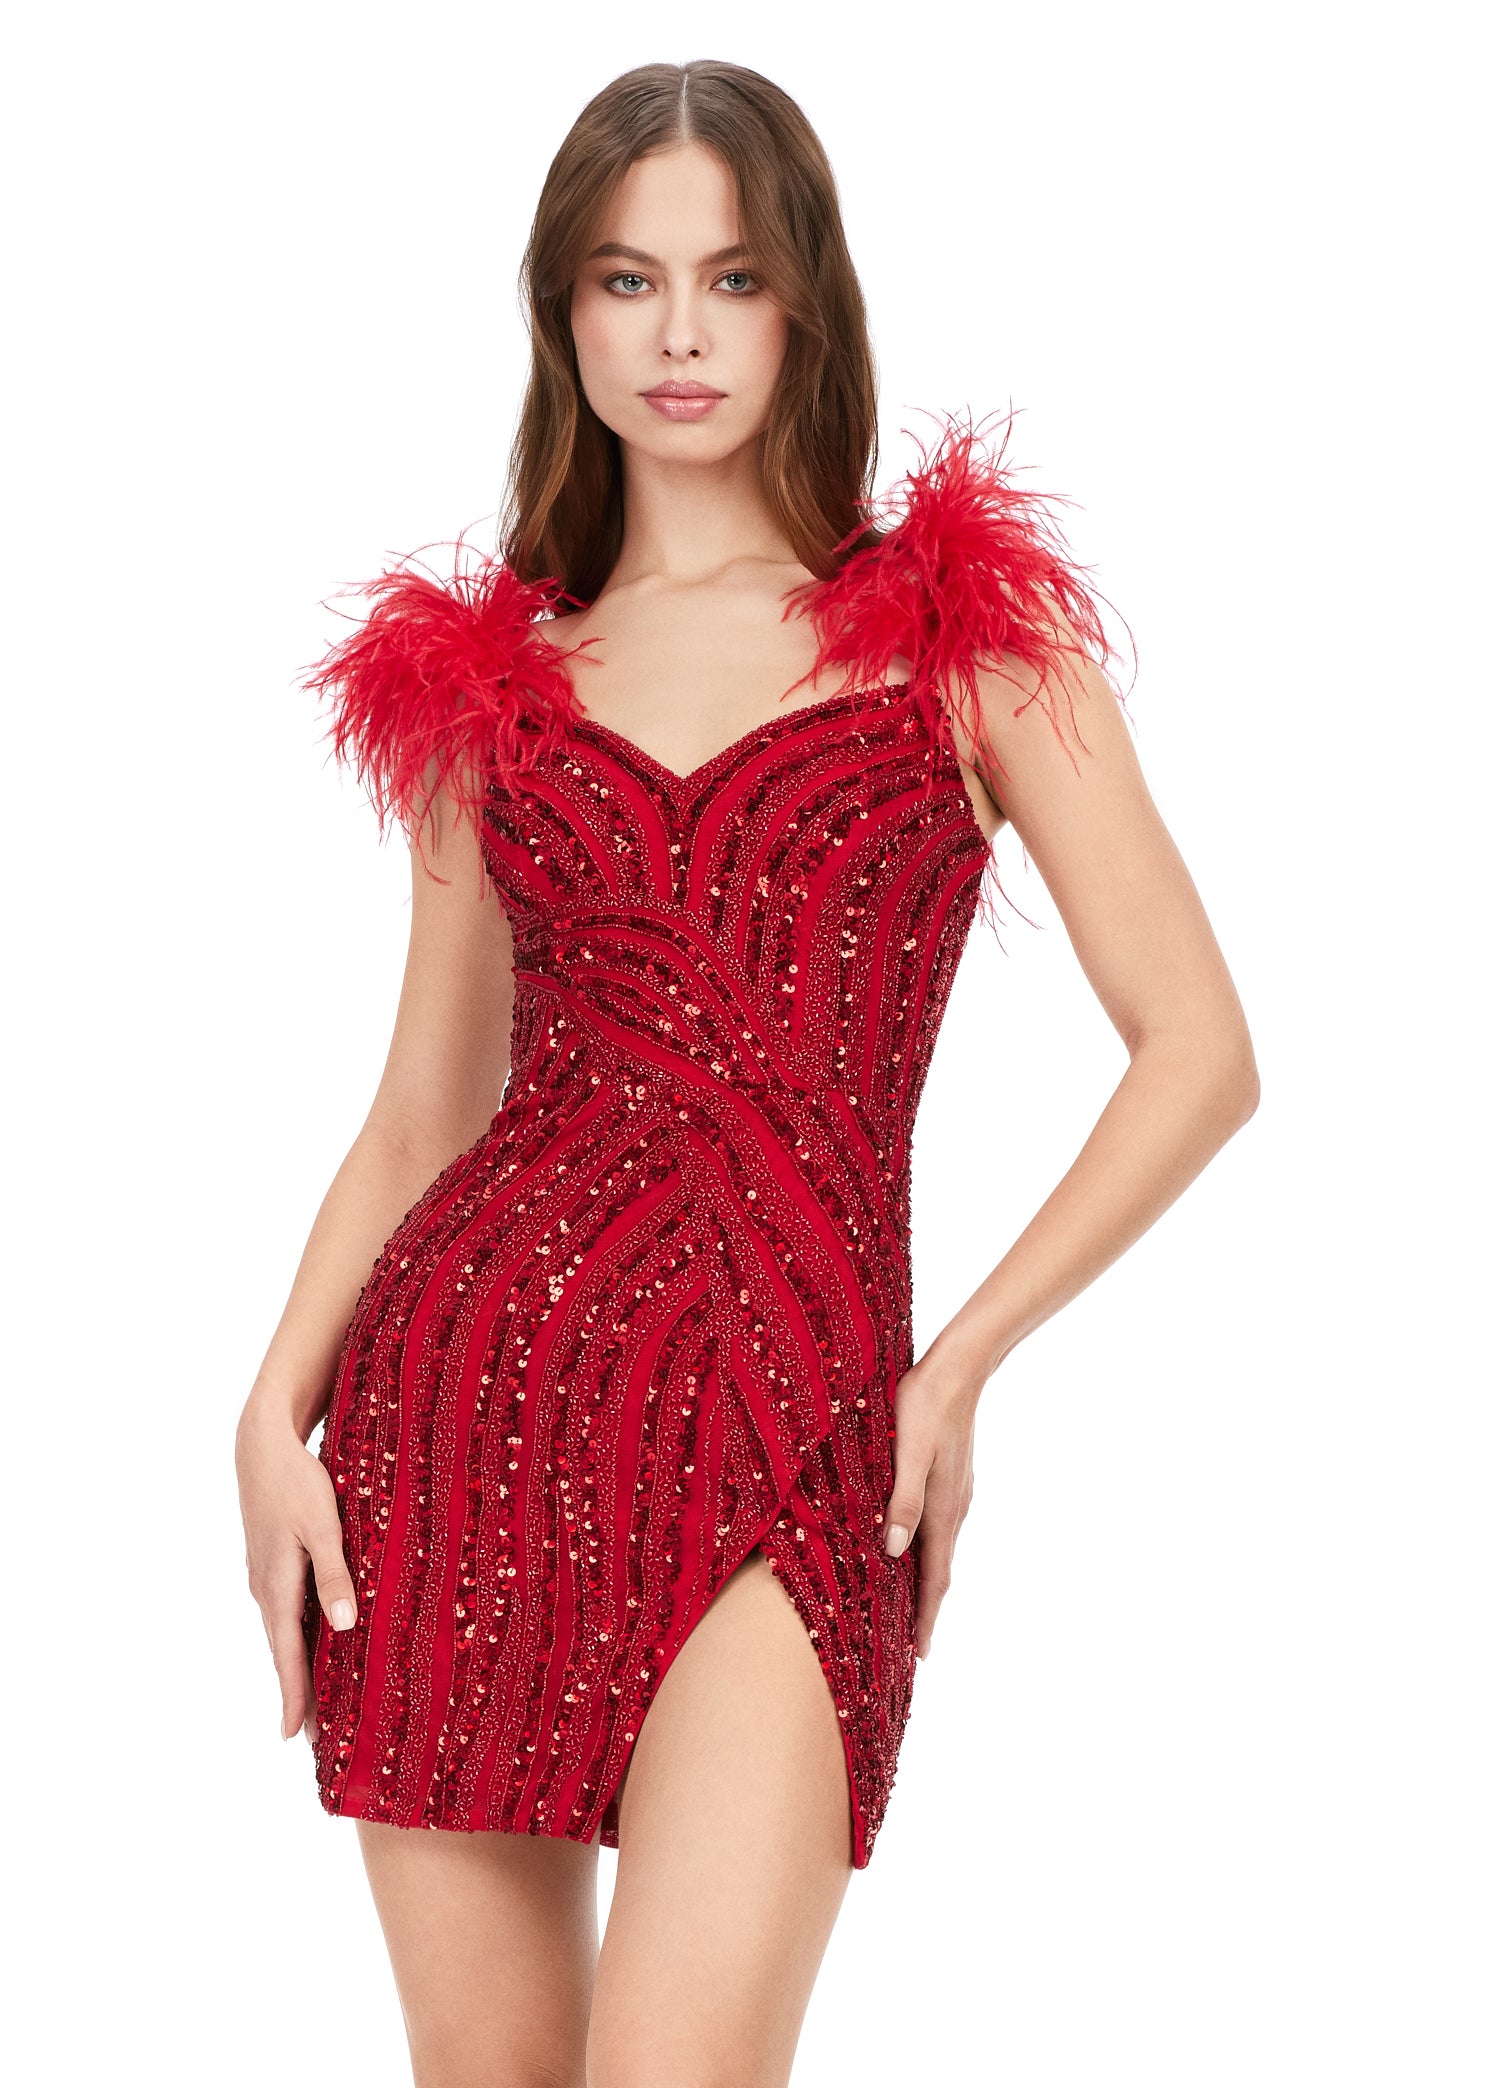 Ashley Lauren 4626 Beaded Spaghetti Strap With Feather Design Fitted Cocktail Homecoming Dress. Look amazing in the Ashley Lauren 4626 dress. This fitted cocktail homecoming dress features beautiful beaded details, spaghetti straps, and a unique feather design for an unforgettable look. Wear it and be the envy of the party.